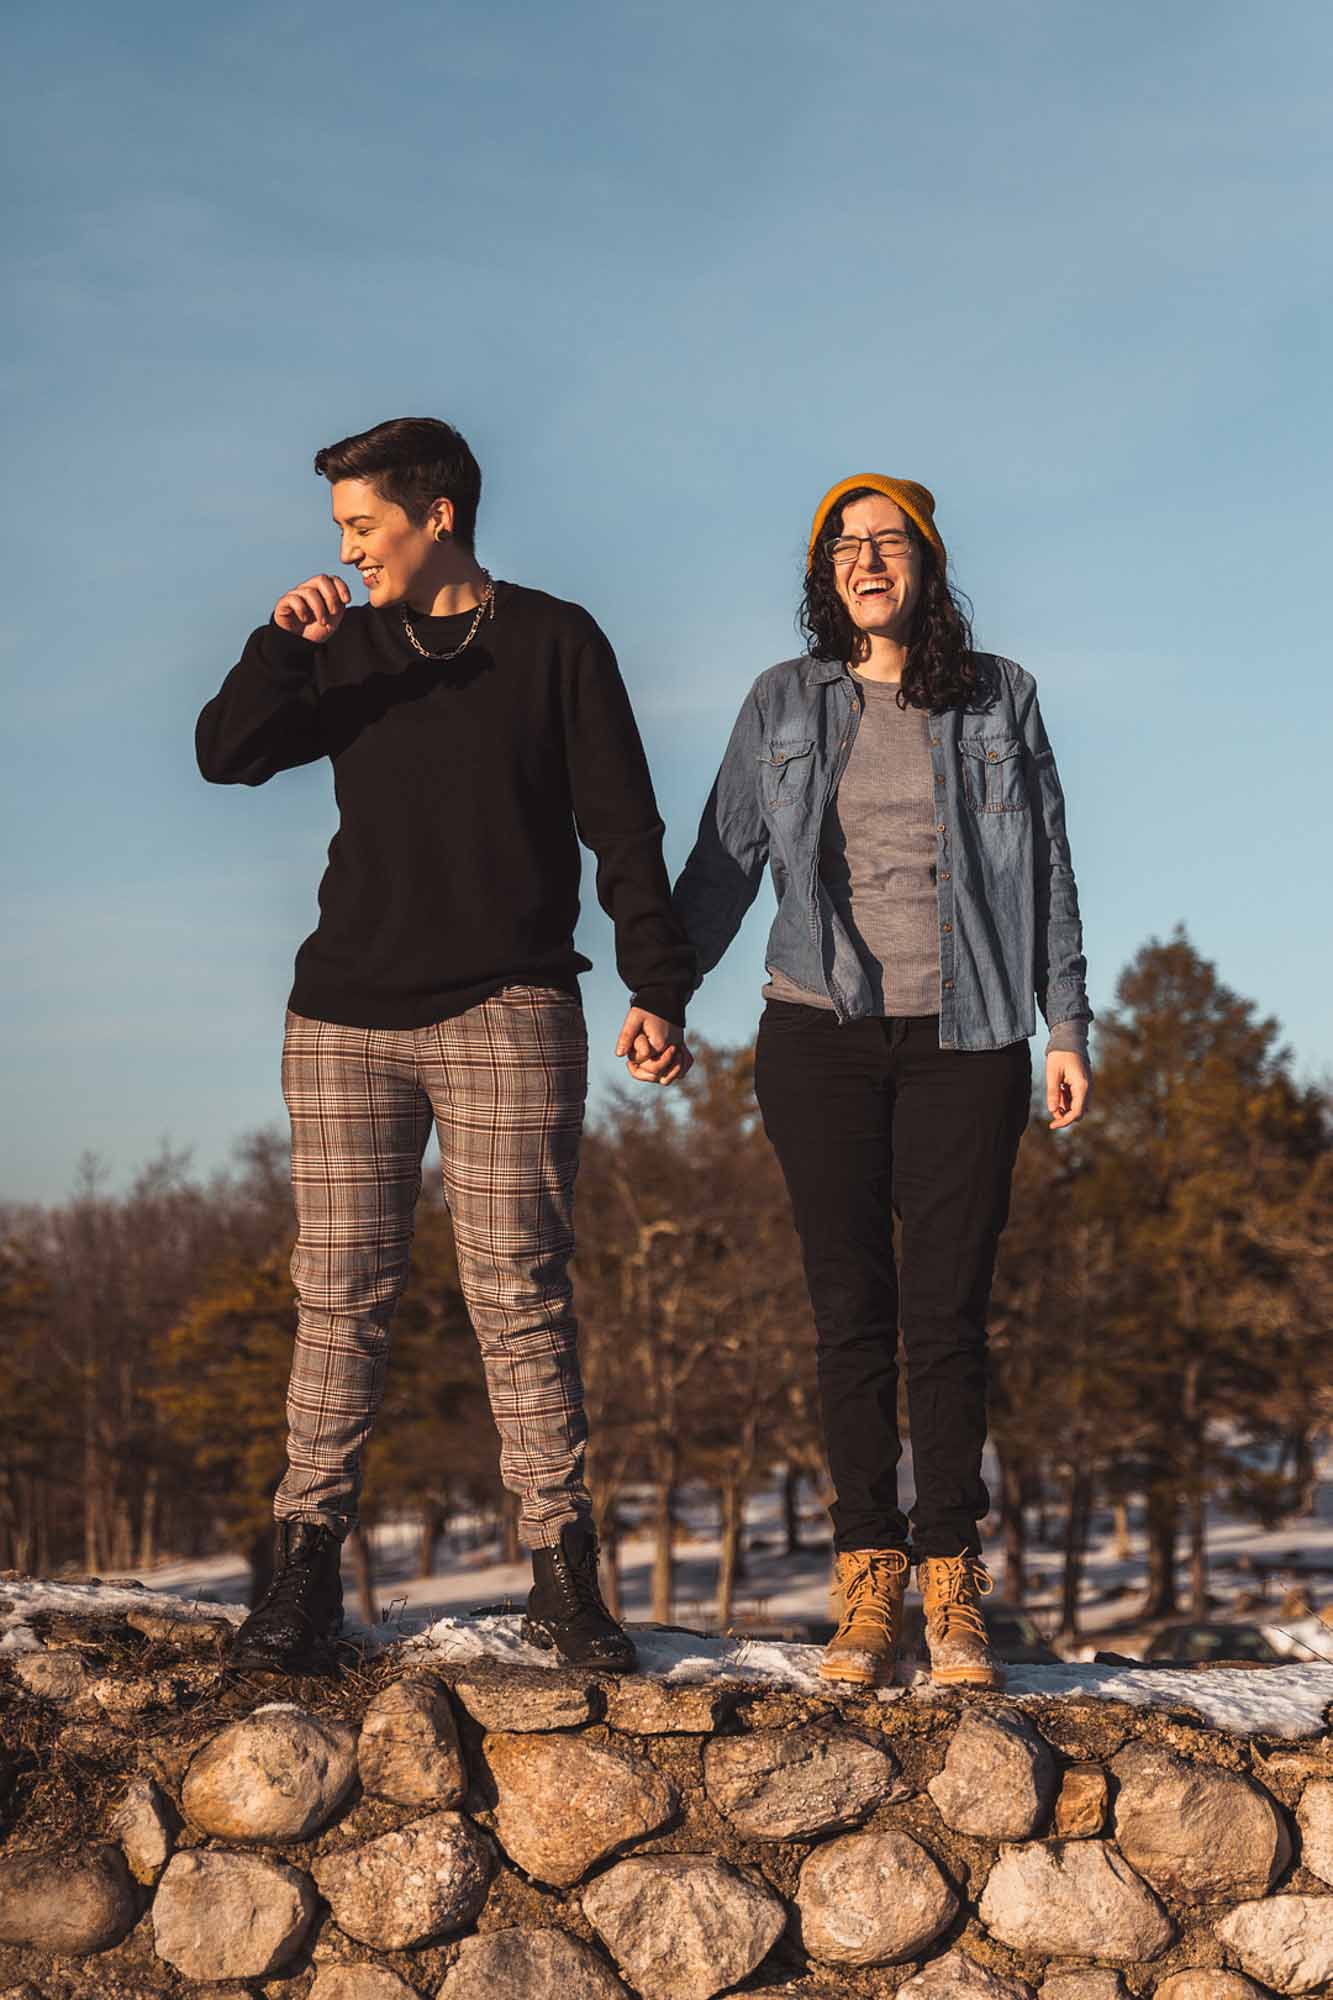 Winter wonderland engagement session at New Jersey's High Point State Park | Dawn Point Studios | Featured on Equally Wed, the leading LGBTQ+ wedding magazine